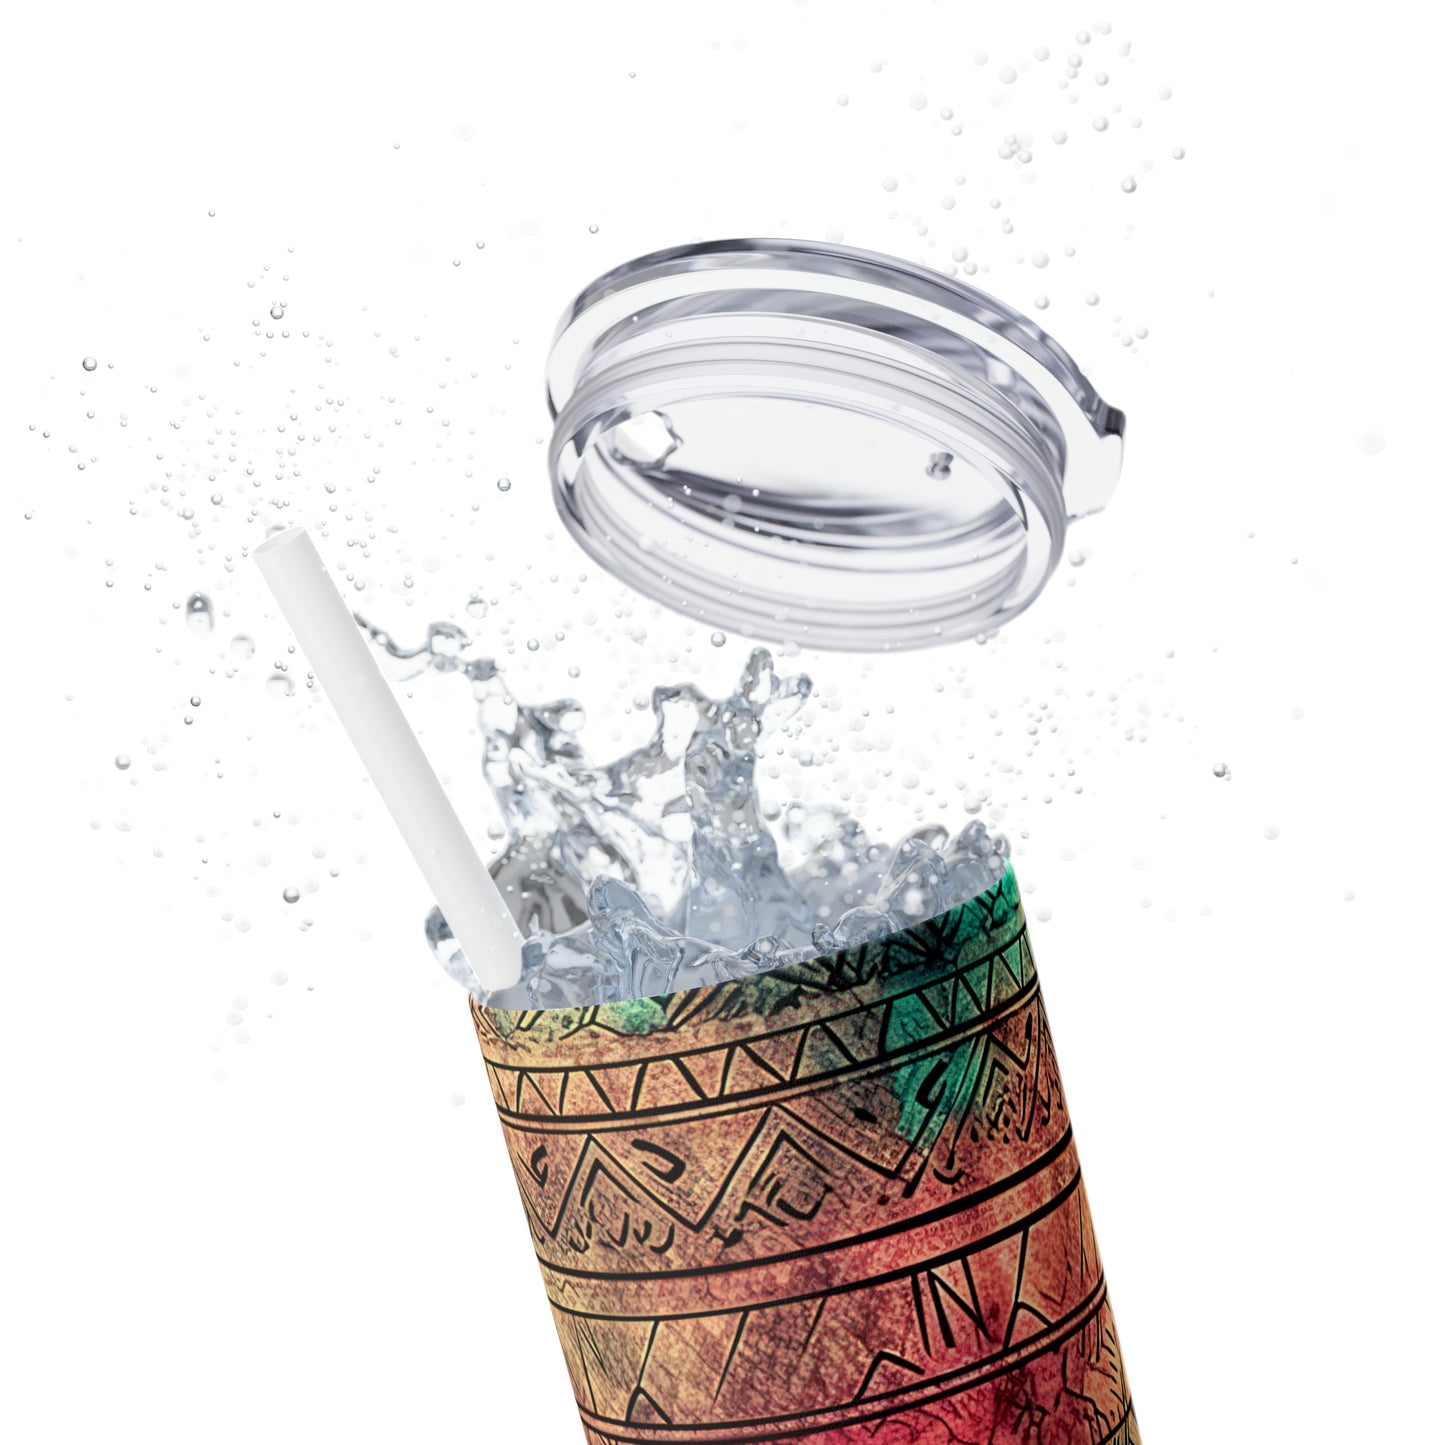 Teal Abstract - Skinny Tumbler with Straw, 20oz